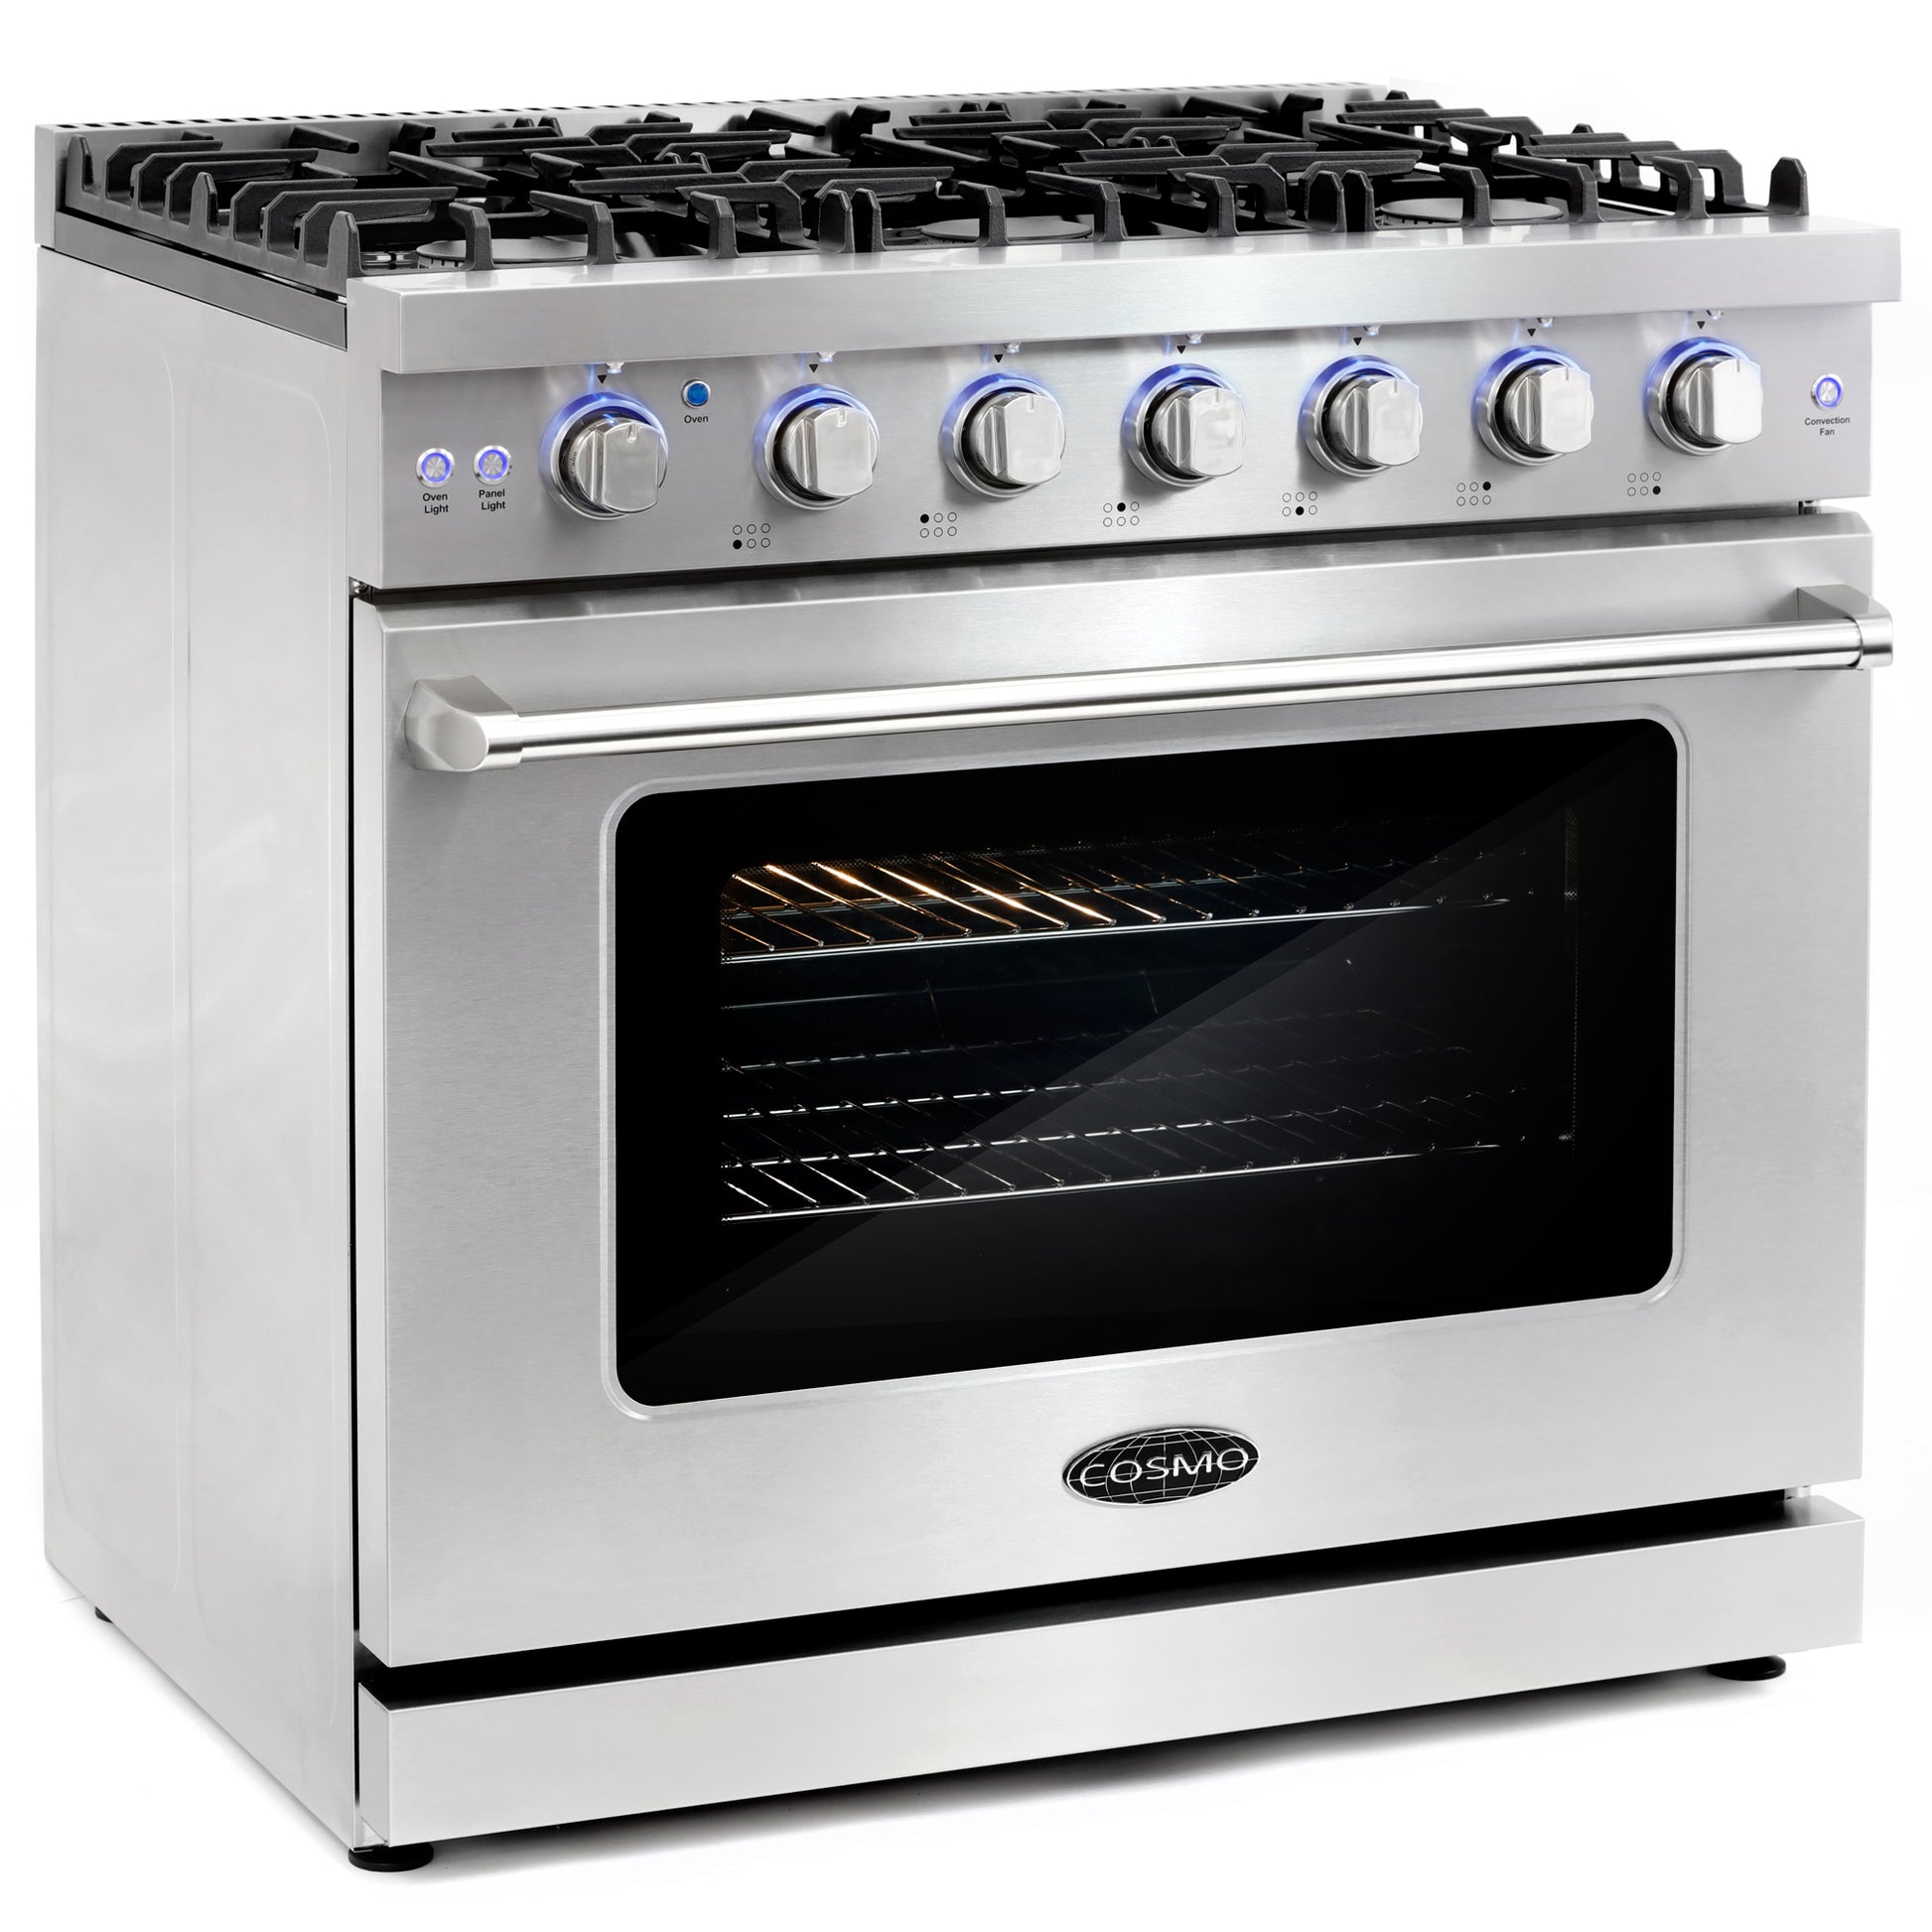 Cosmo 36 in. 6.0 cu. ft. Commercial Gas Range in Stainless Steel with Convection Oven with Storage Drawer